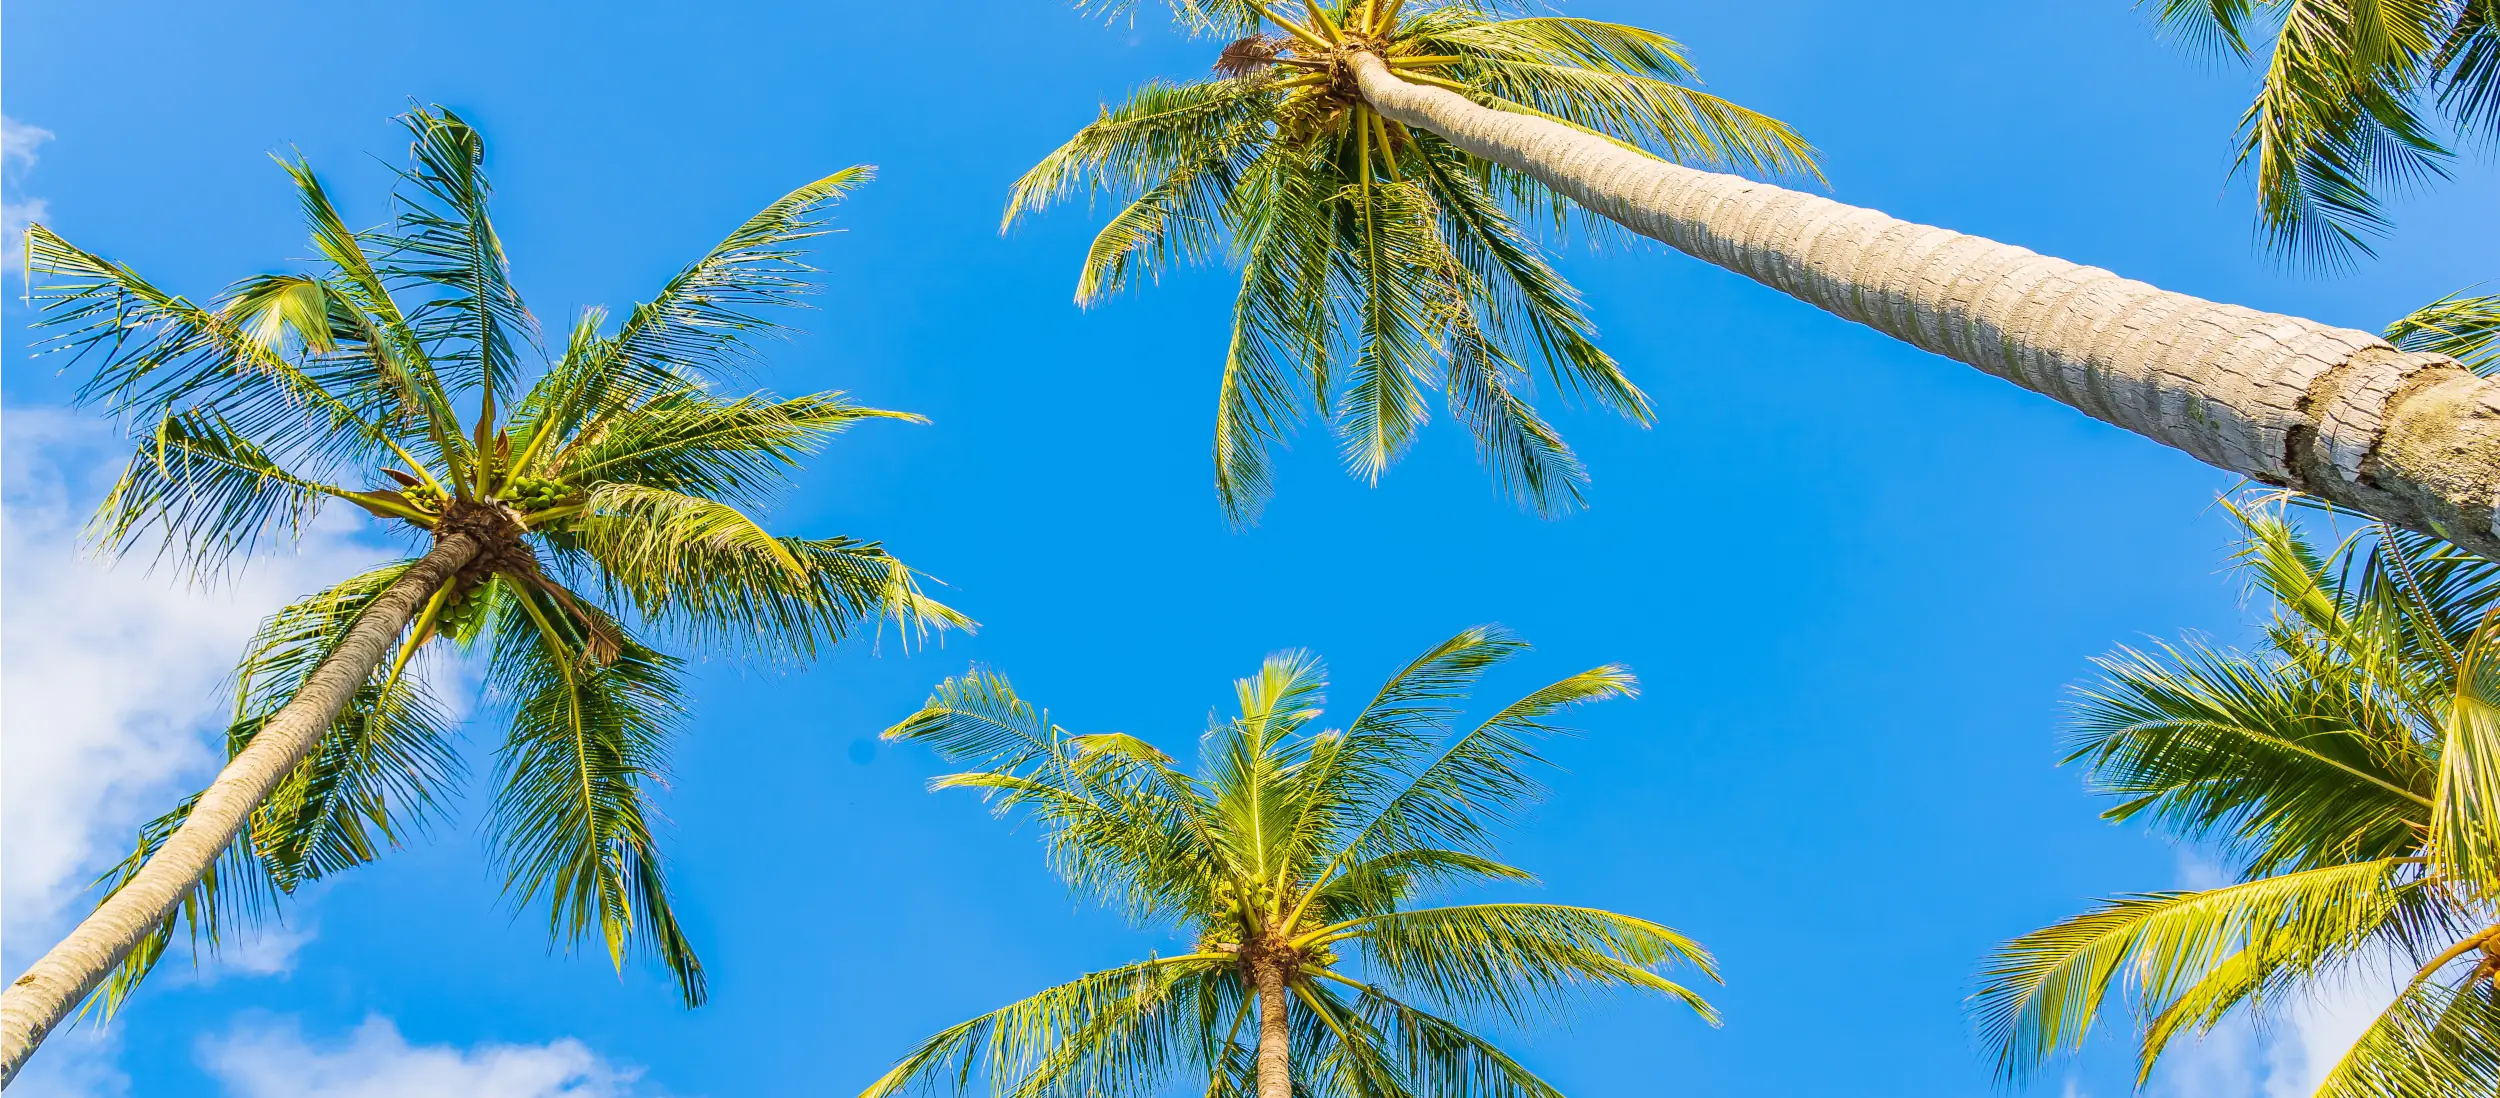 Background Picture of Palm Trees